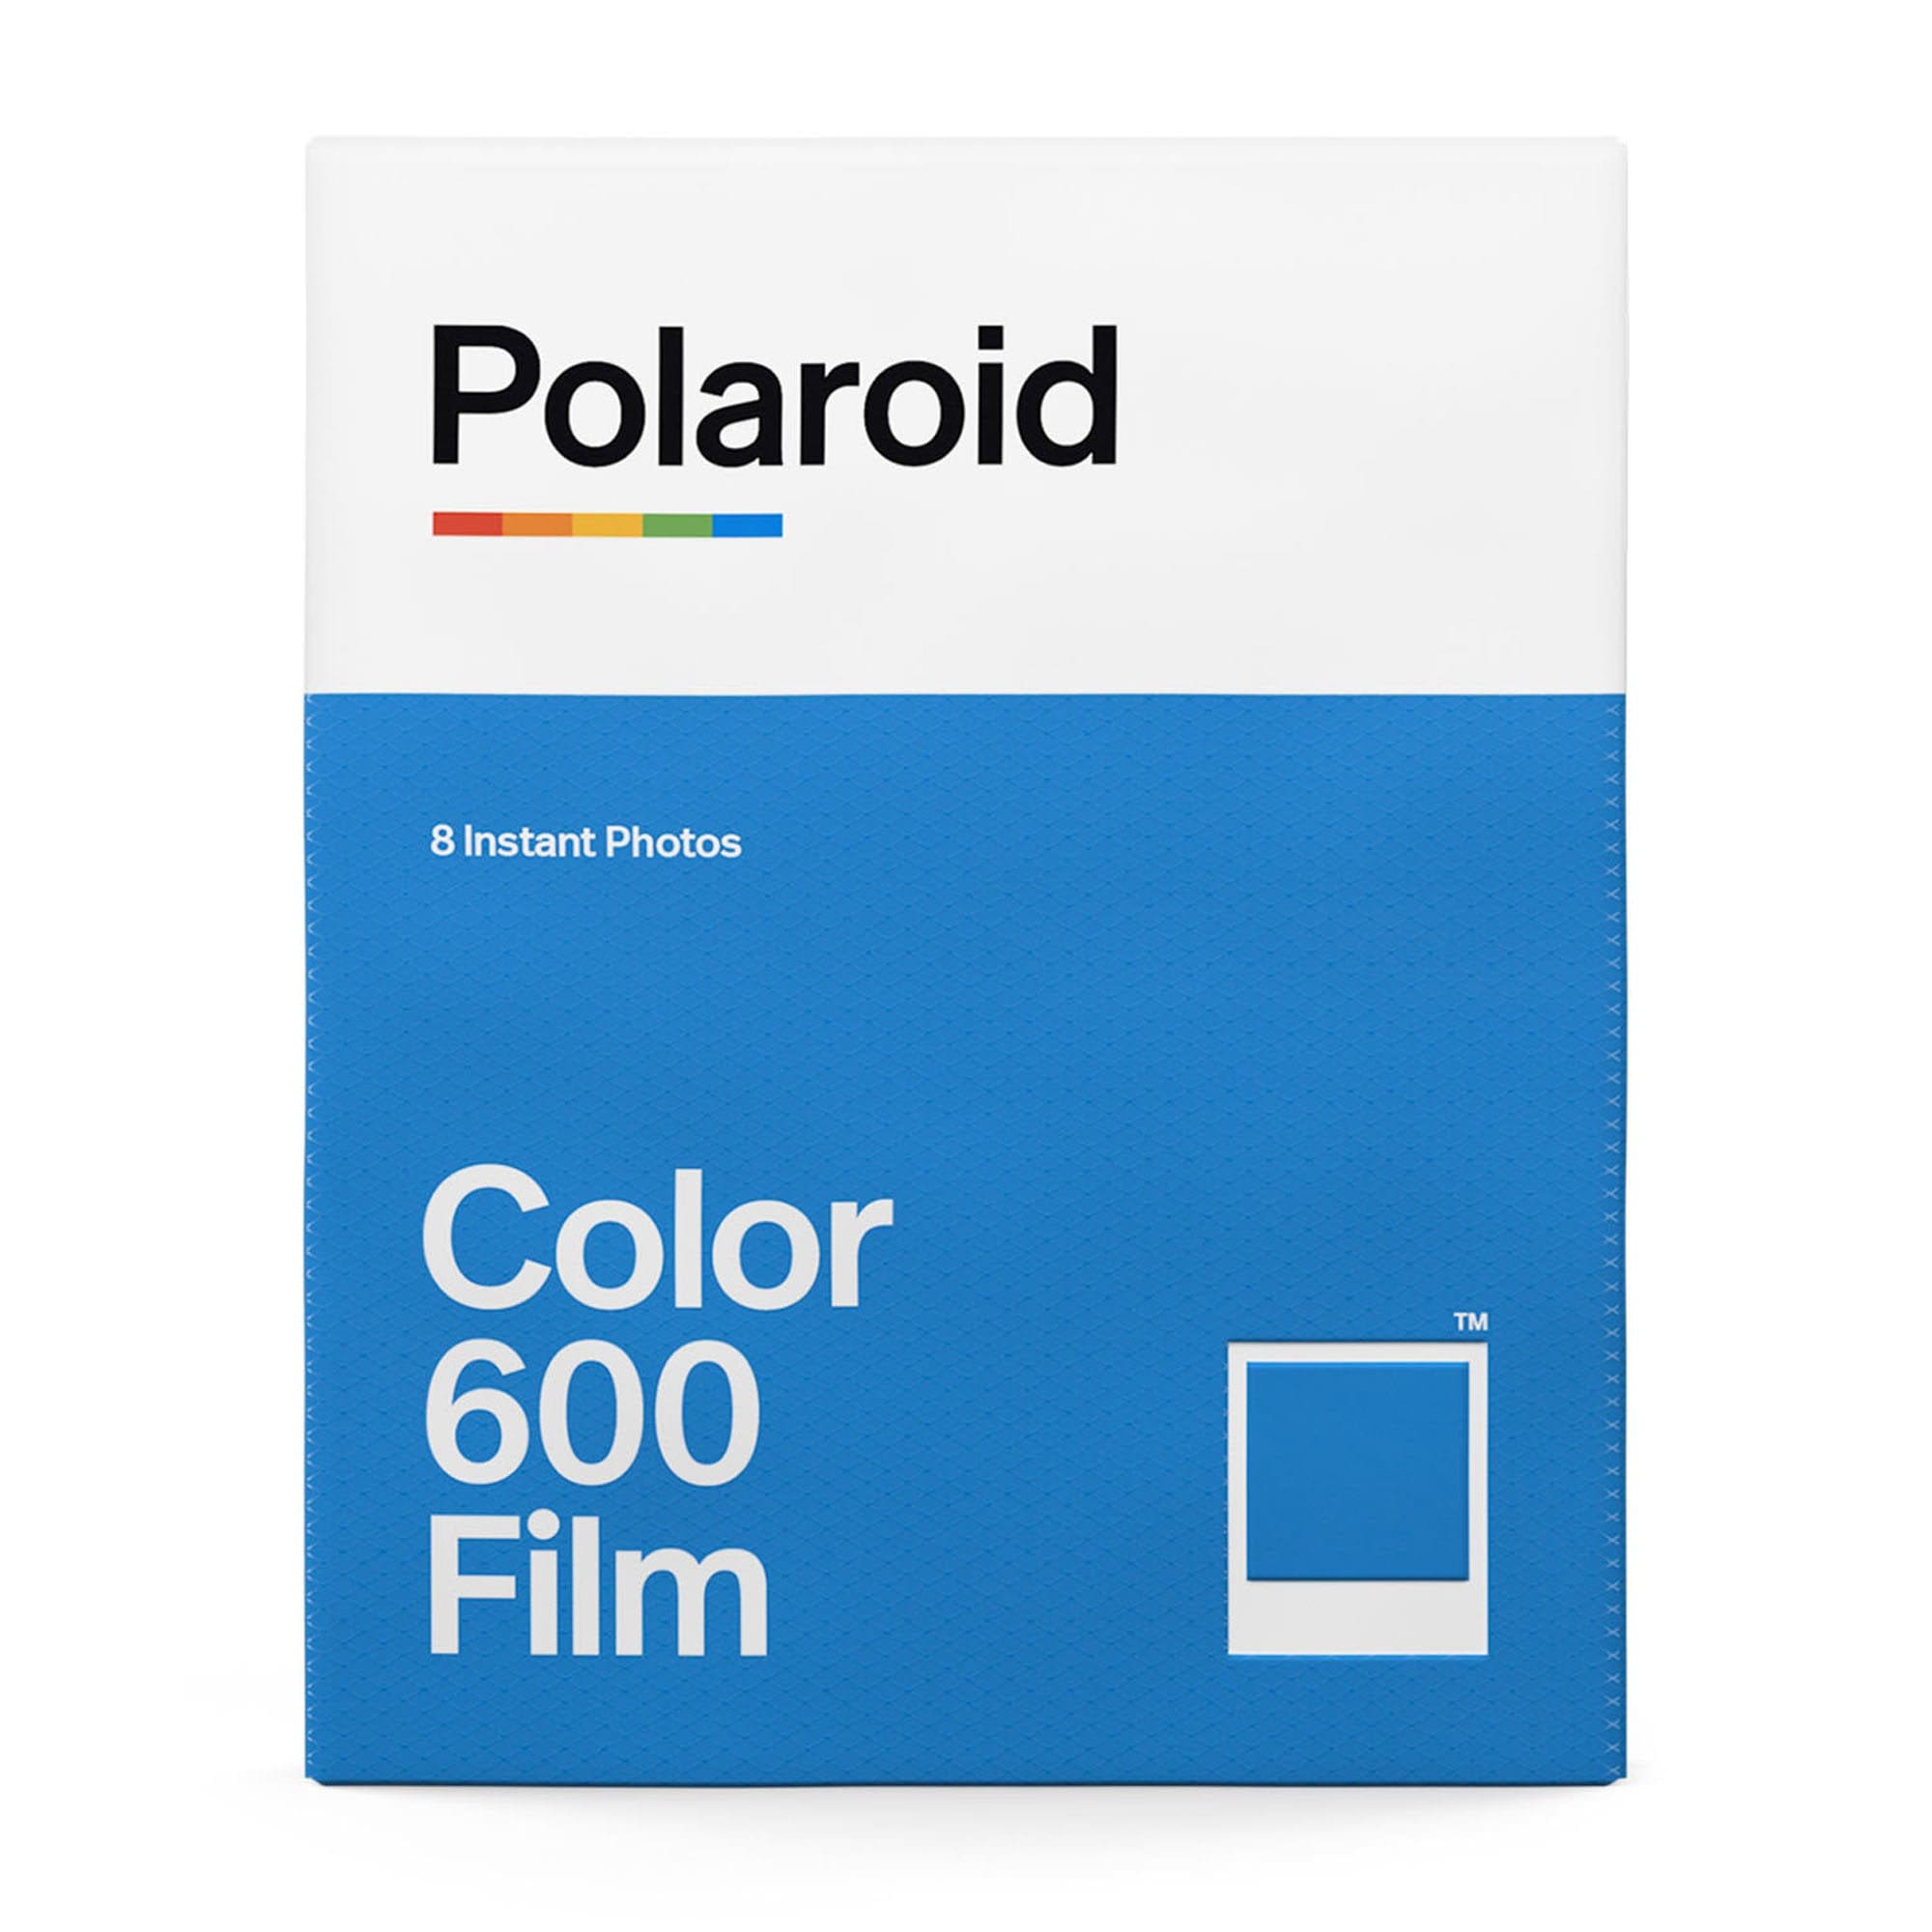 Aan Cadeau Voldoen New Polaroid Color 600 Film Pack for Polaroid 600 Series - Etsy